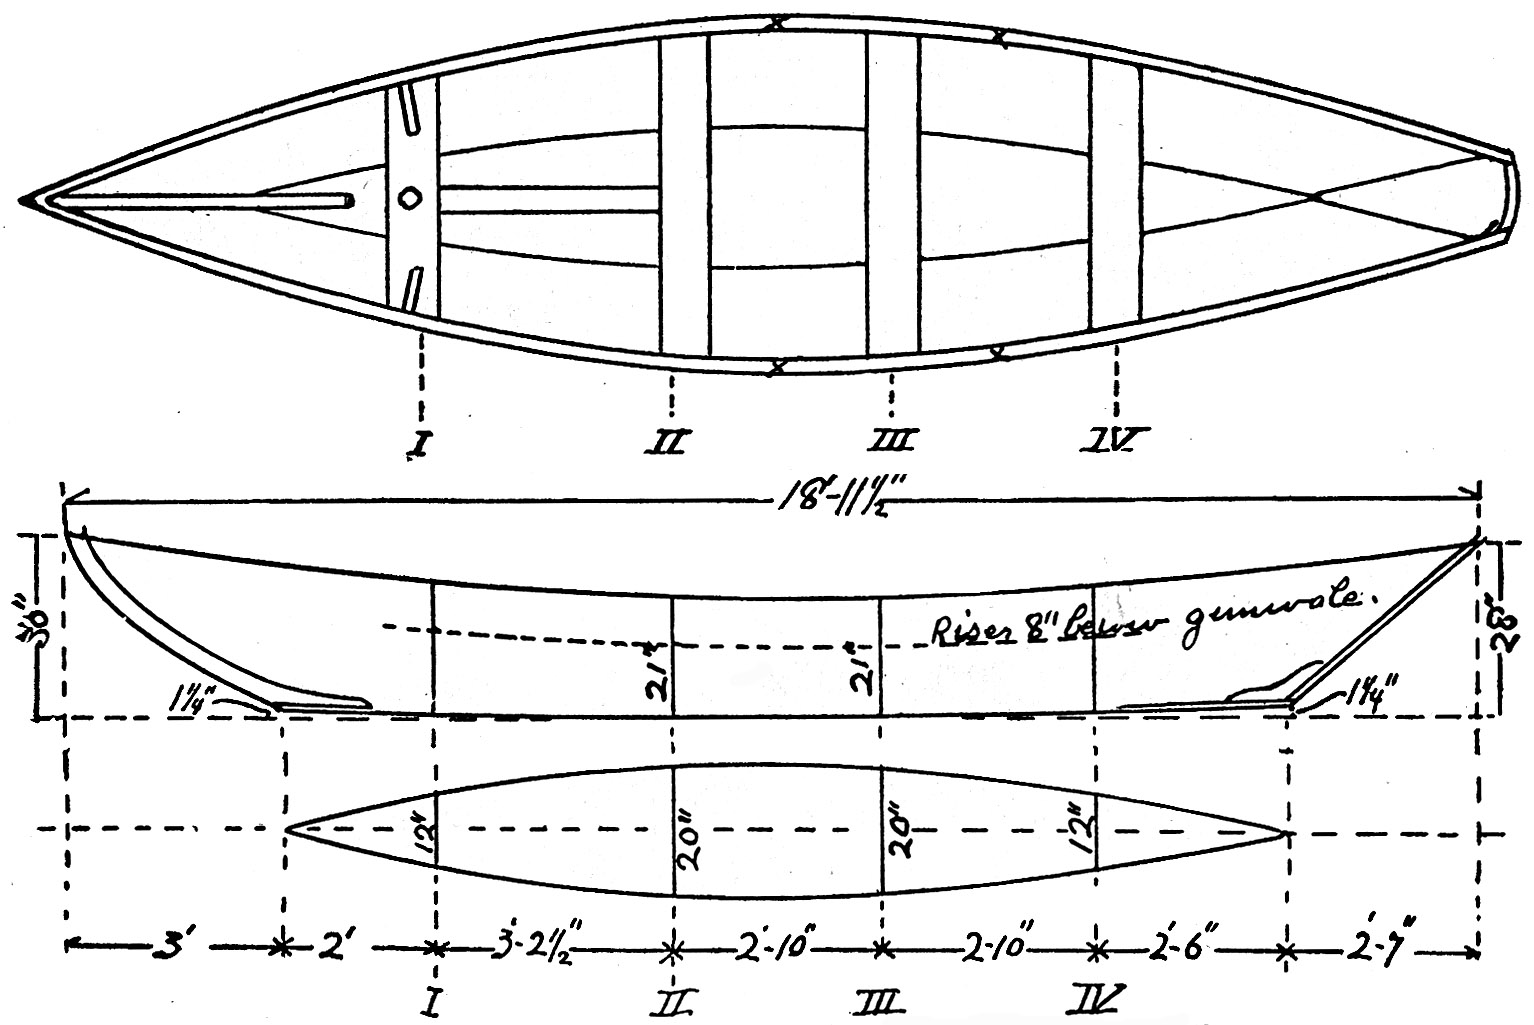 boat dory plans free how to & diy building plans